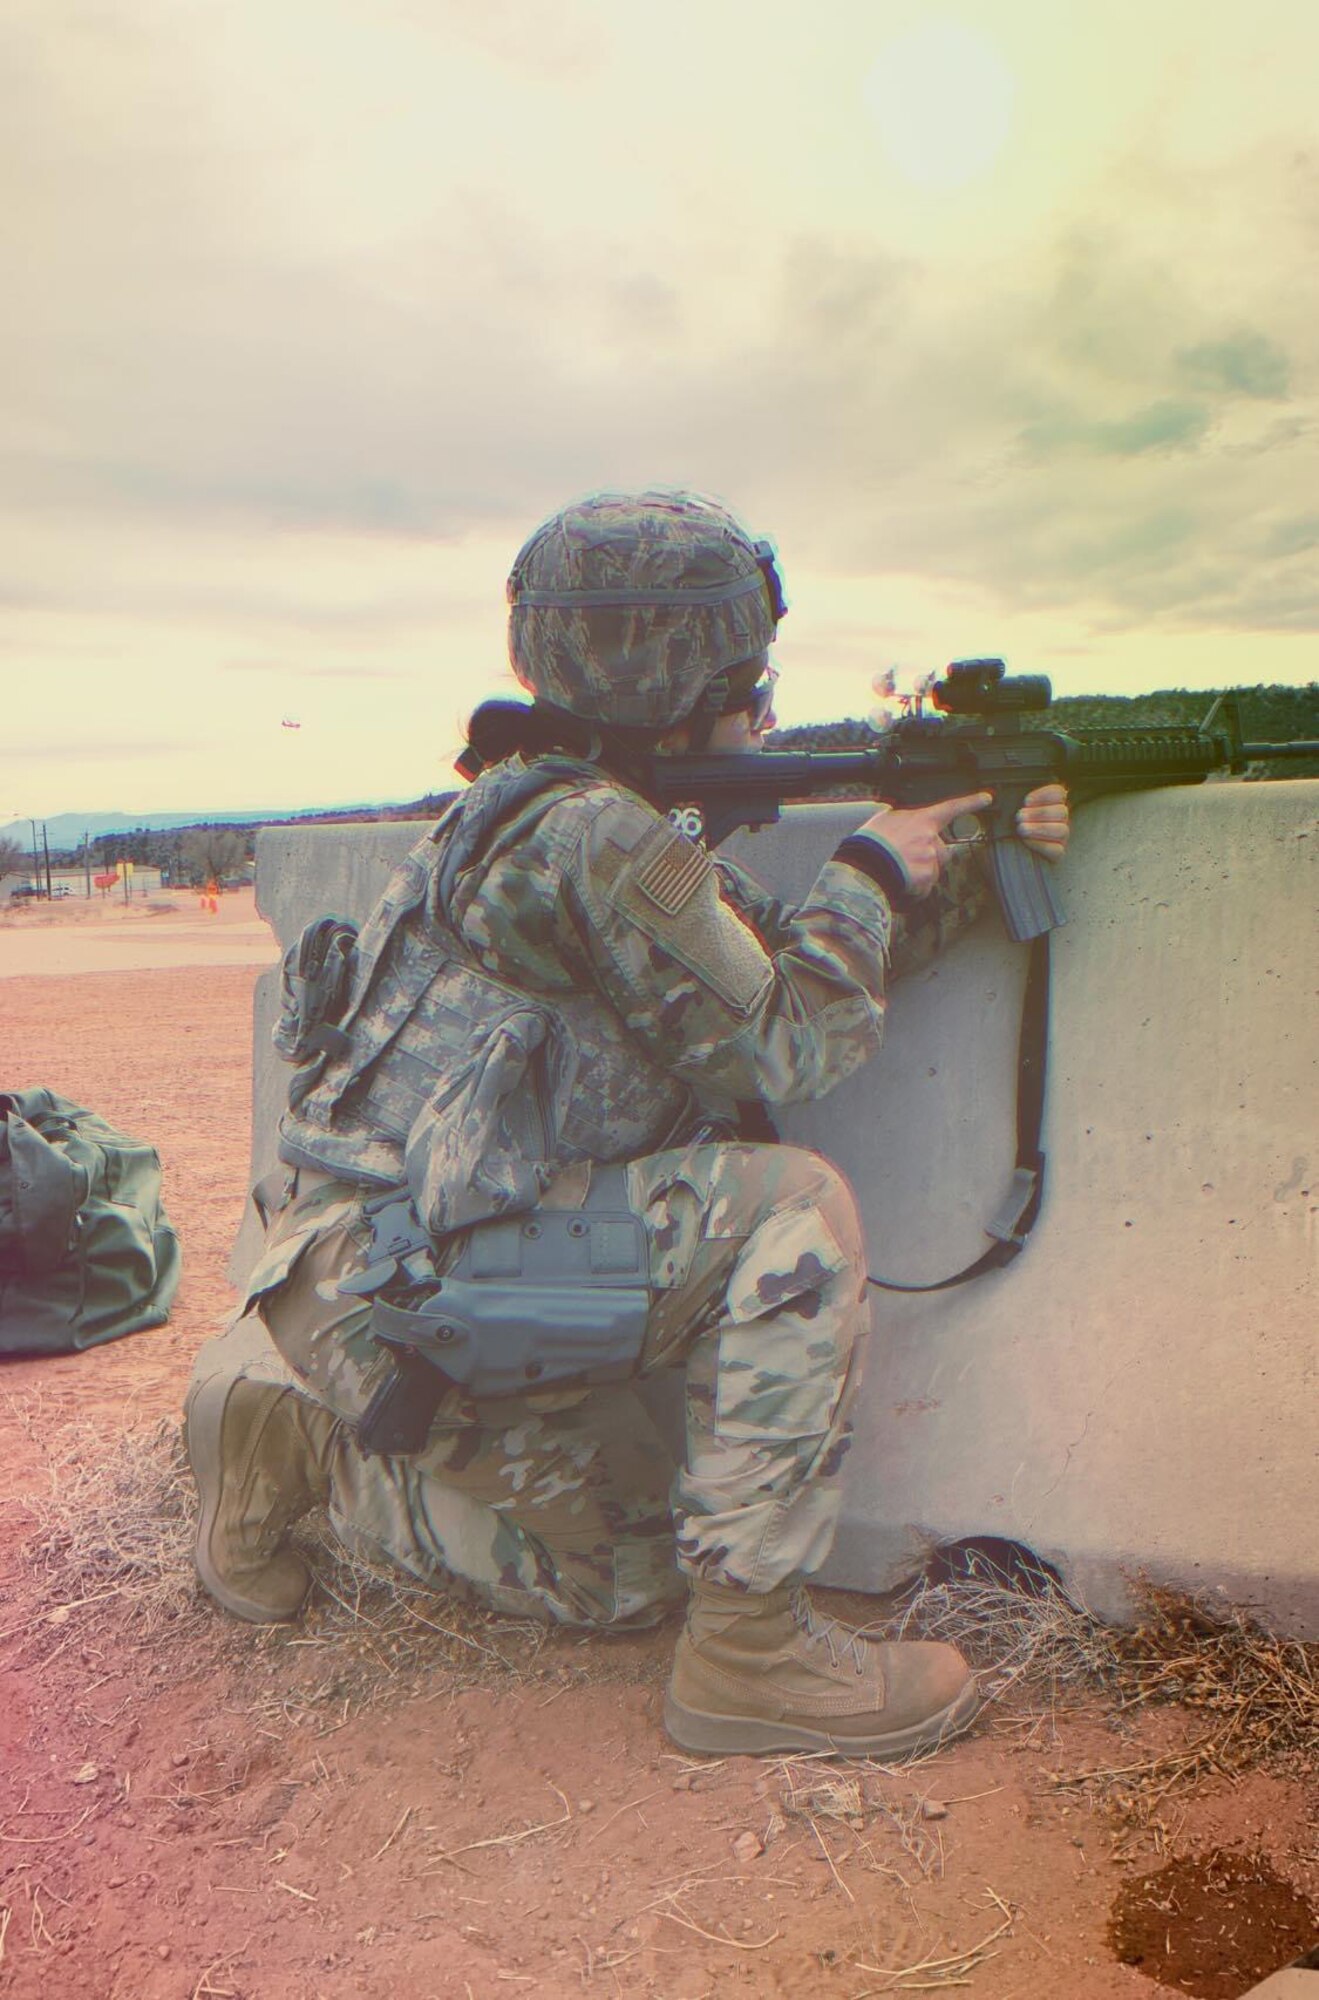 Staff Sgt. Ruby Beilfuss fires her weapon during an exercise at Ft. Carson, Colorado, 2019.